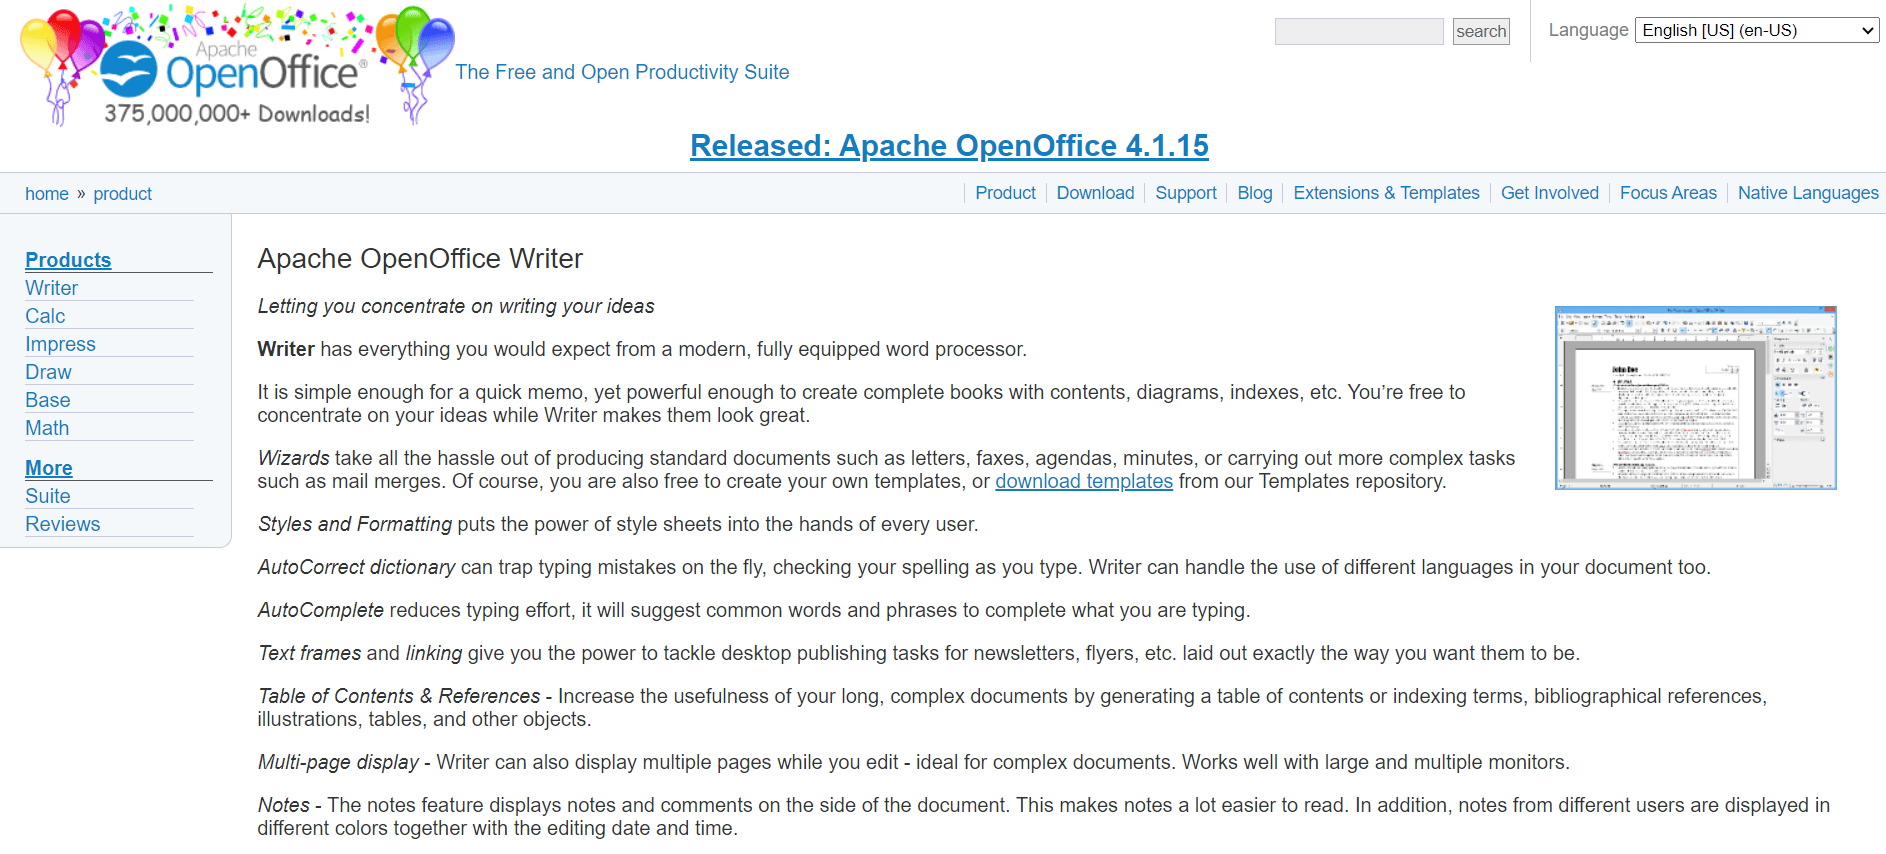 Apache OpenOffice Writer homepage highlighting features such as wizards, styles, formatting, and multiple language support for creating various documents.